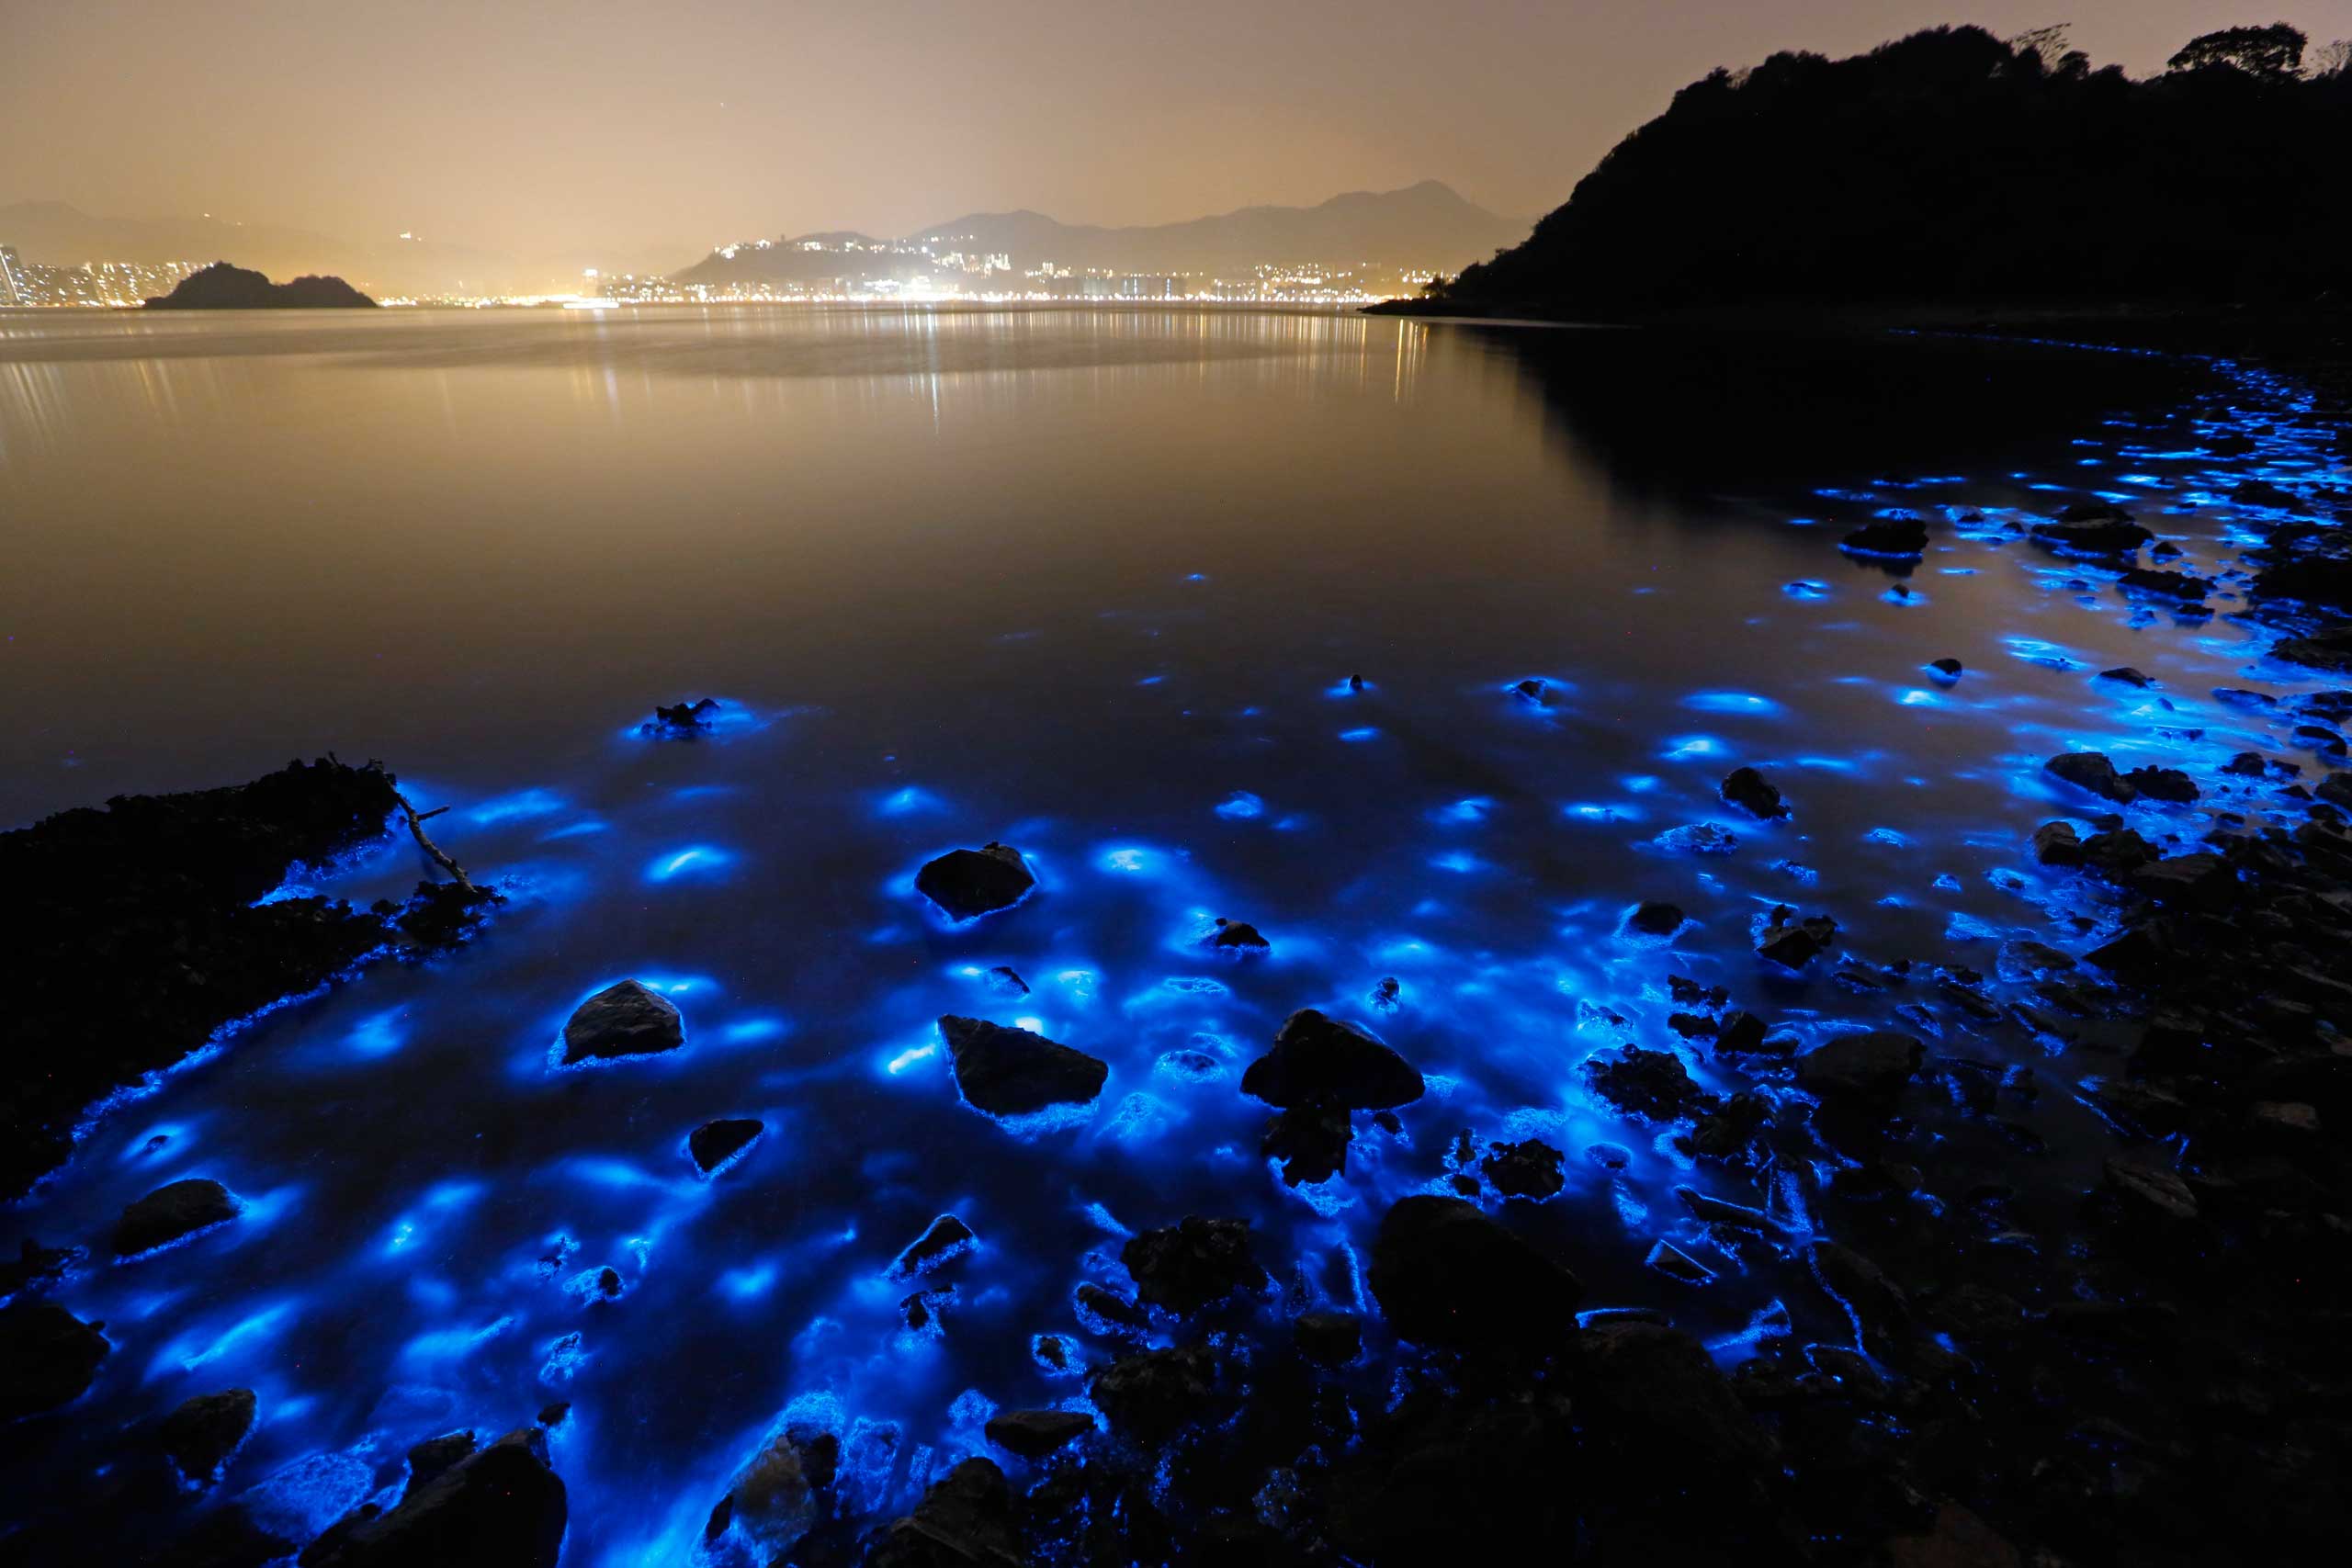 Jan. 22, 2015. A photo made with a long exposure shows the glow from a Noctiluca scintillans algal bloom along the seashore in Hong Kong. The luminescence, also called Sea Sparkle, is triggered by farm pollution that can be devastating to marine life and local fisheries.